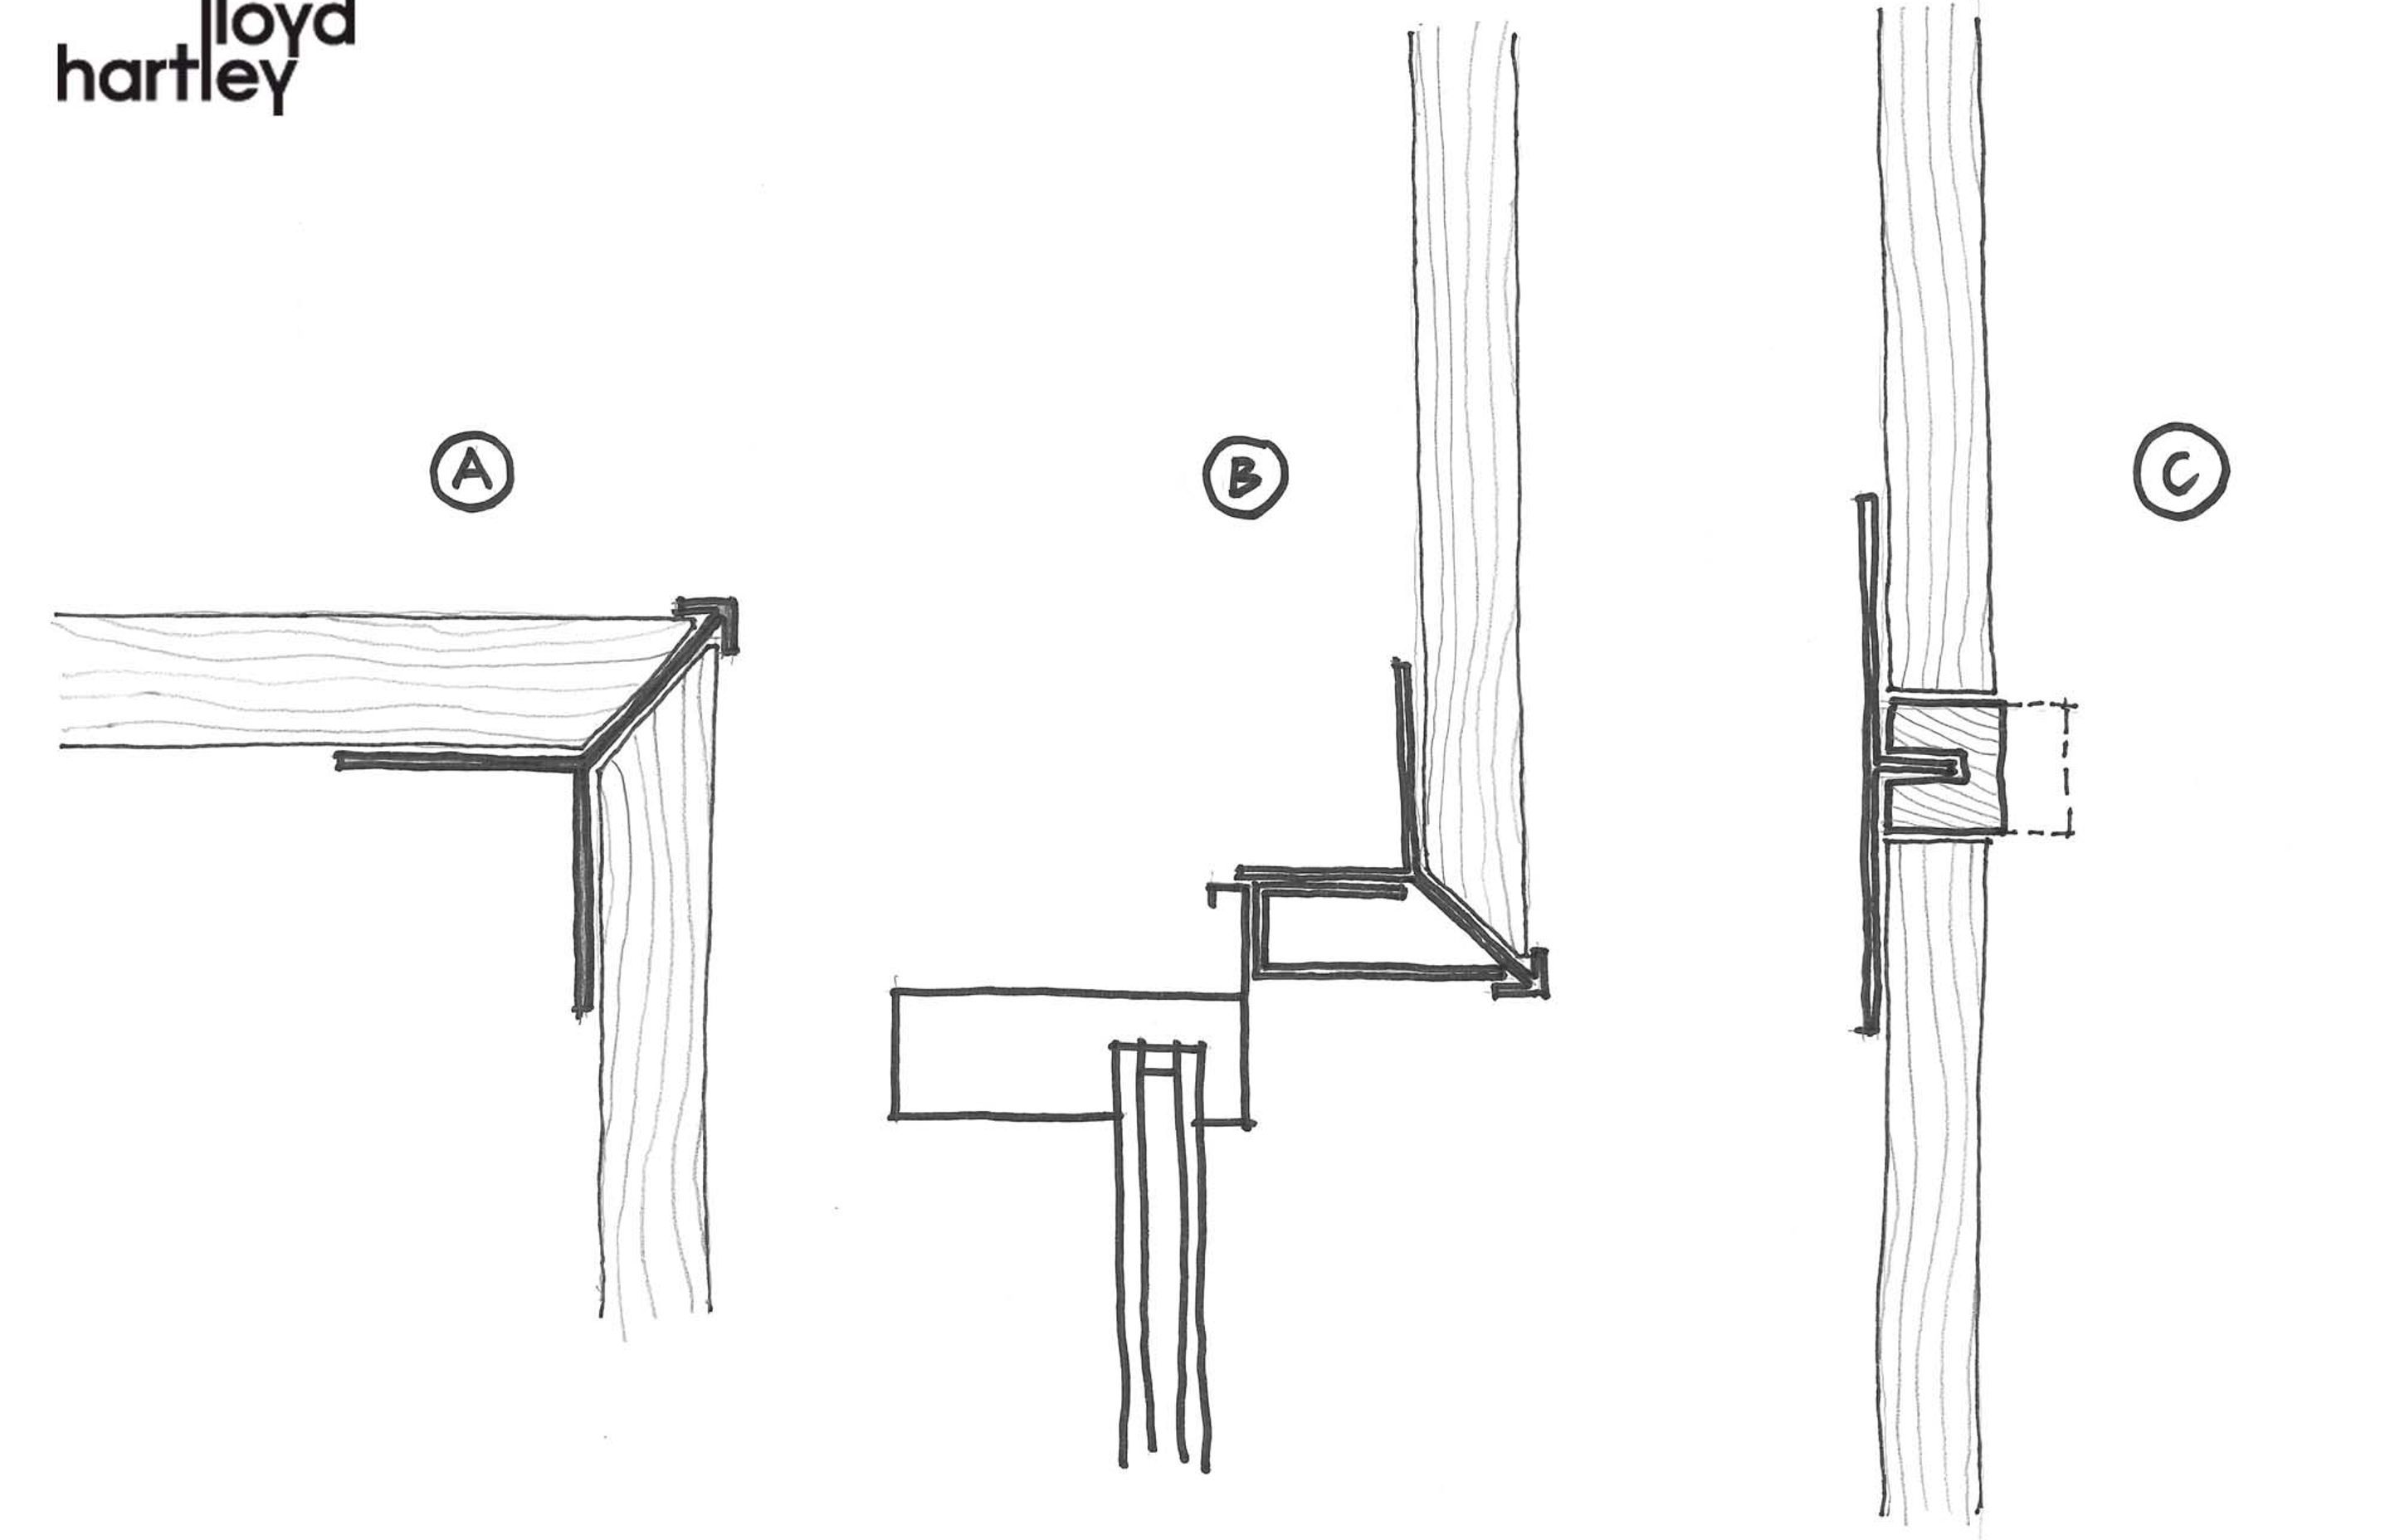 Lloyd Hartley's detail sketches of vertical shiplap cedar weatherboards shows the transition from weatherboard to weatherboard and relates to the sketch below.